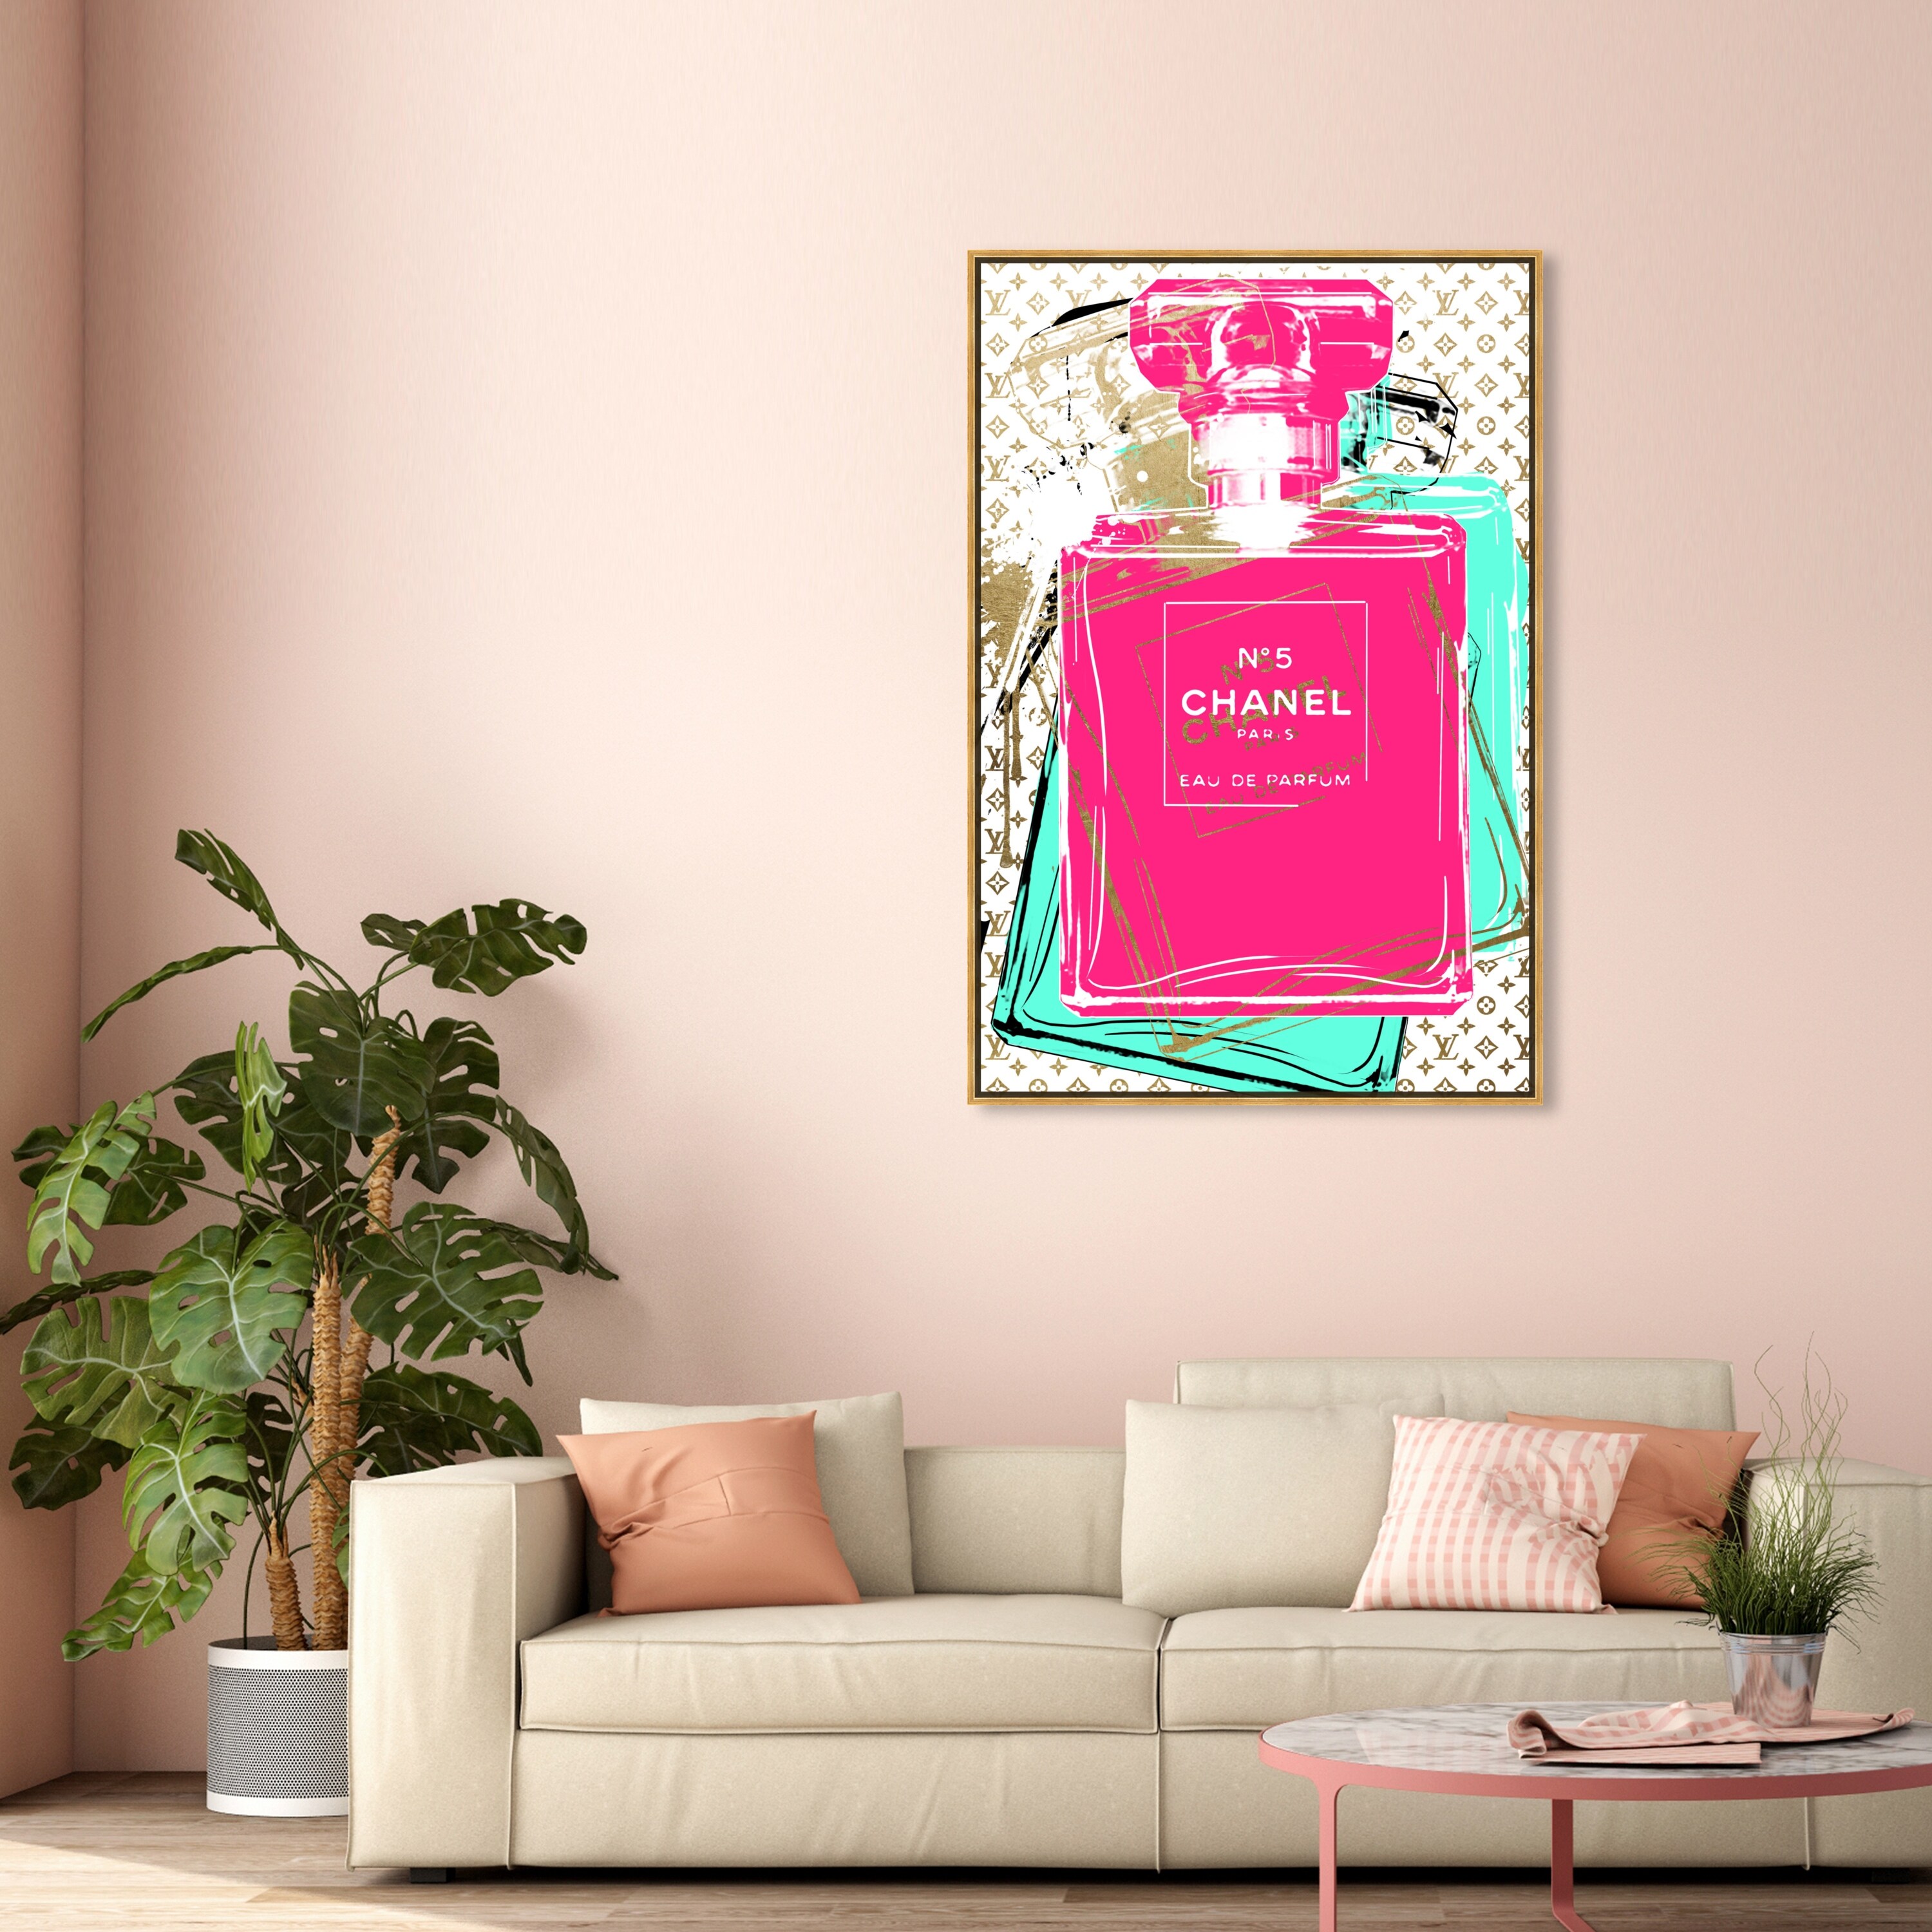 Oliver Gal 'Drink it Colorful' Drinks and Spirits Wall Art Canvas Print  Liquor - Black, Pink - On Sale - Bed Bath & Beyond - 32195588